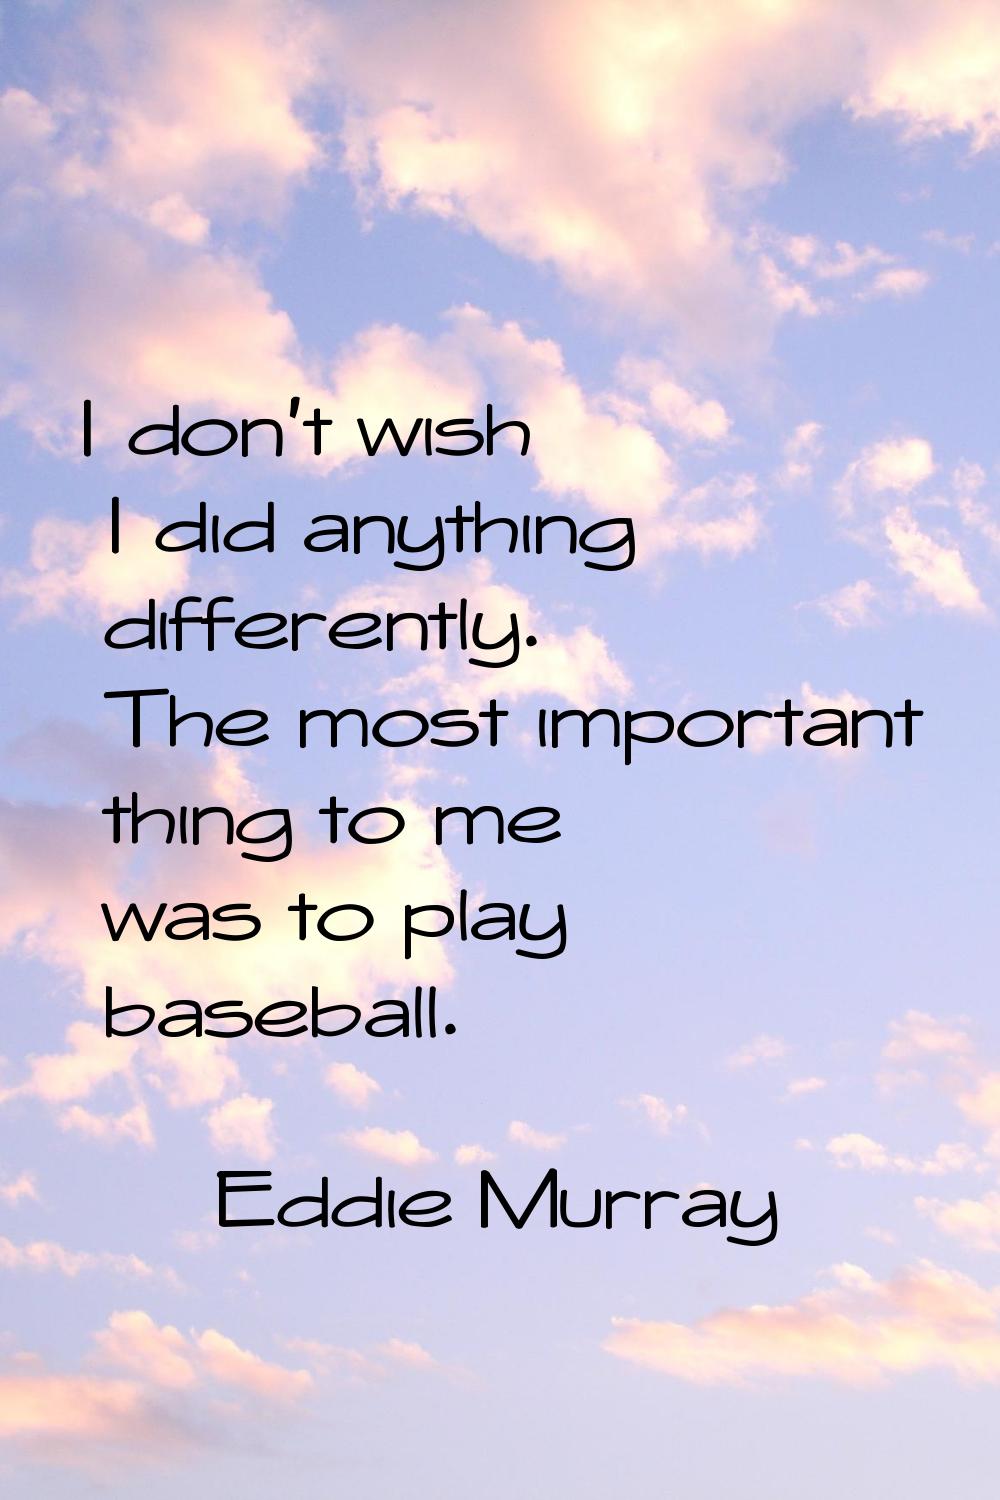 I don't wish I did anything differently. The most important thing to me was to play baseball.